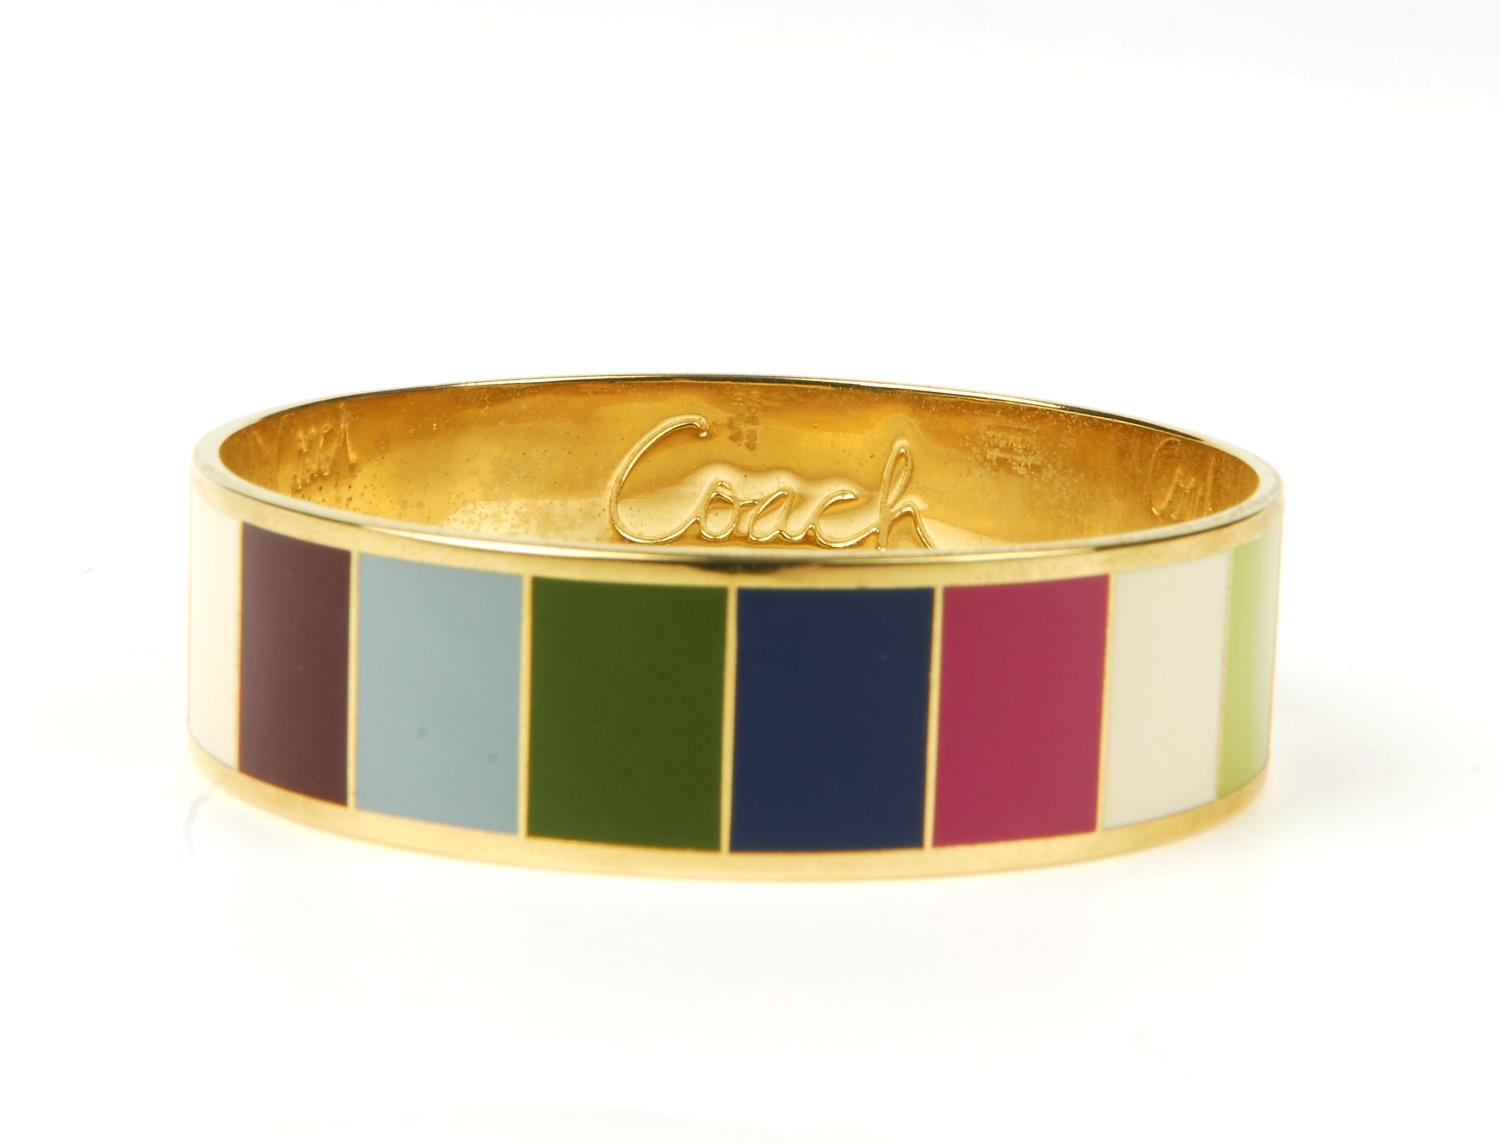 COACH - a Legacy striped bangle. The gold-tone bangle featuring multicoloured striped enamel inlay - Image 8 of 9